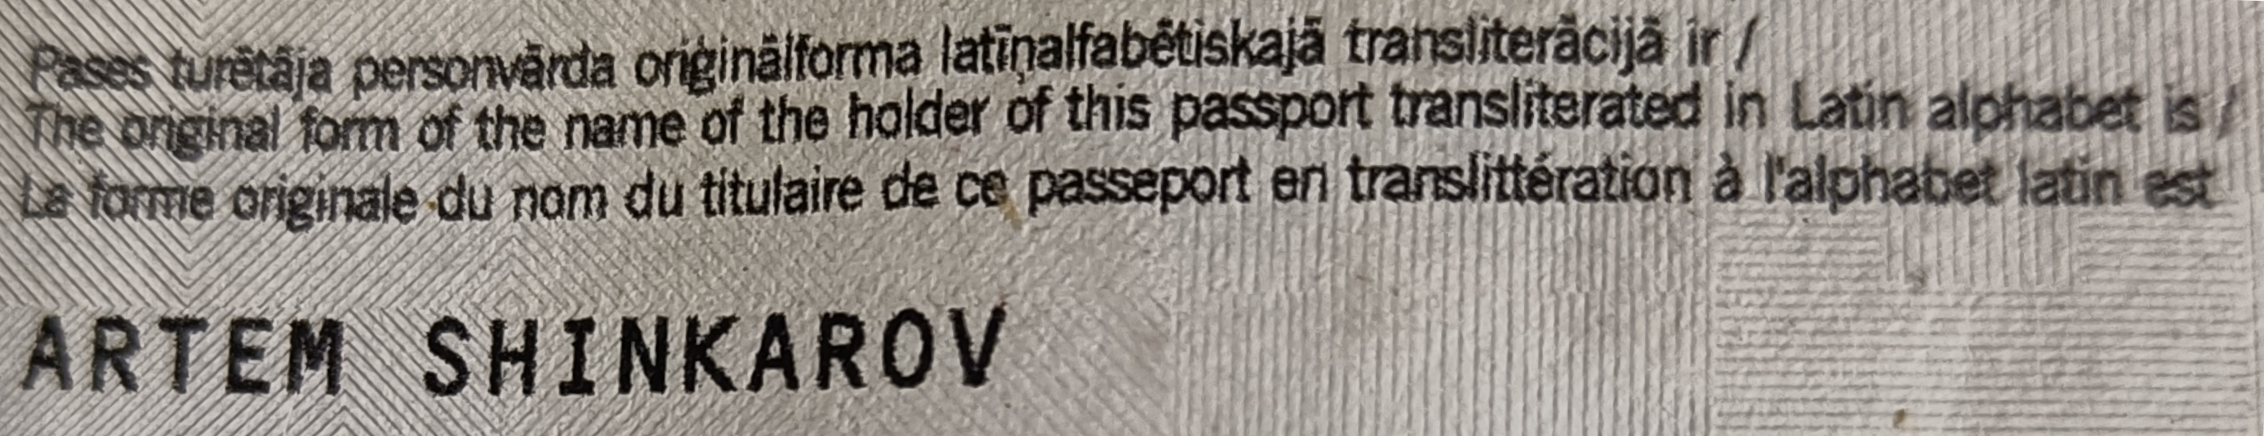 The second page of my passport